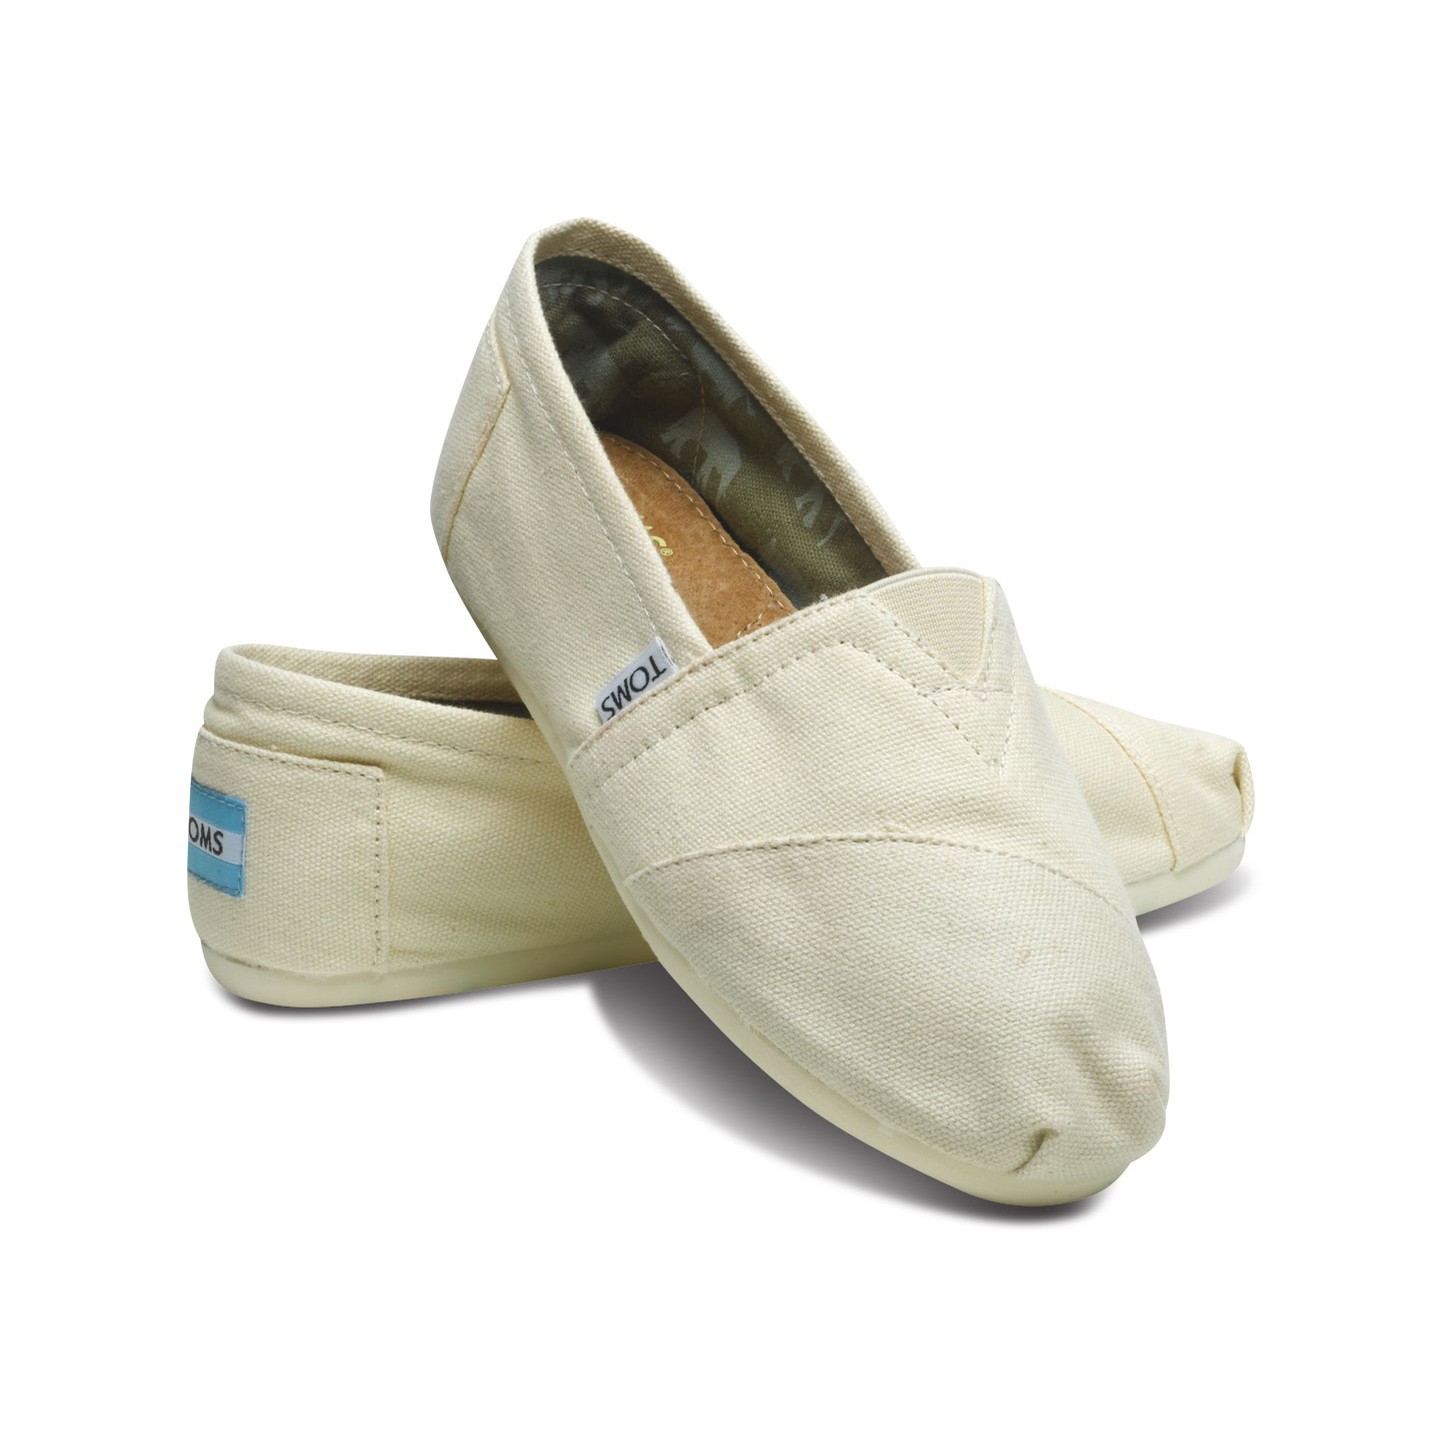 Toms Shoes Classic Slip On (White 